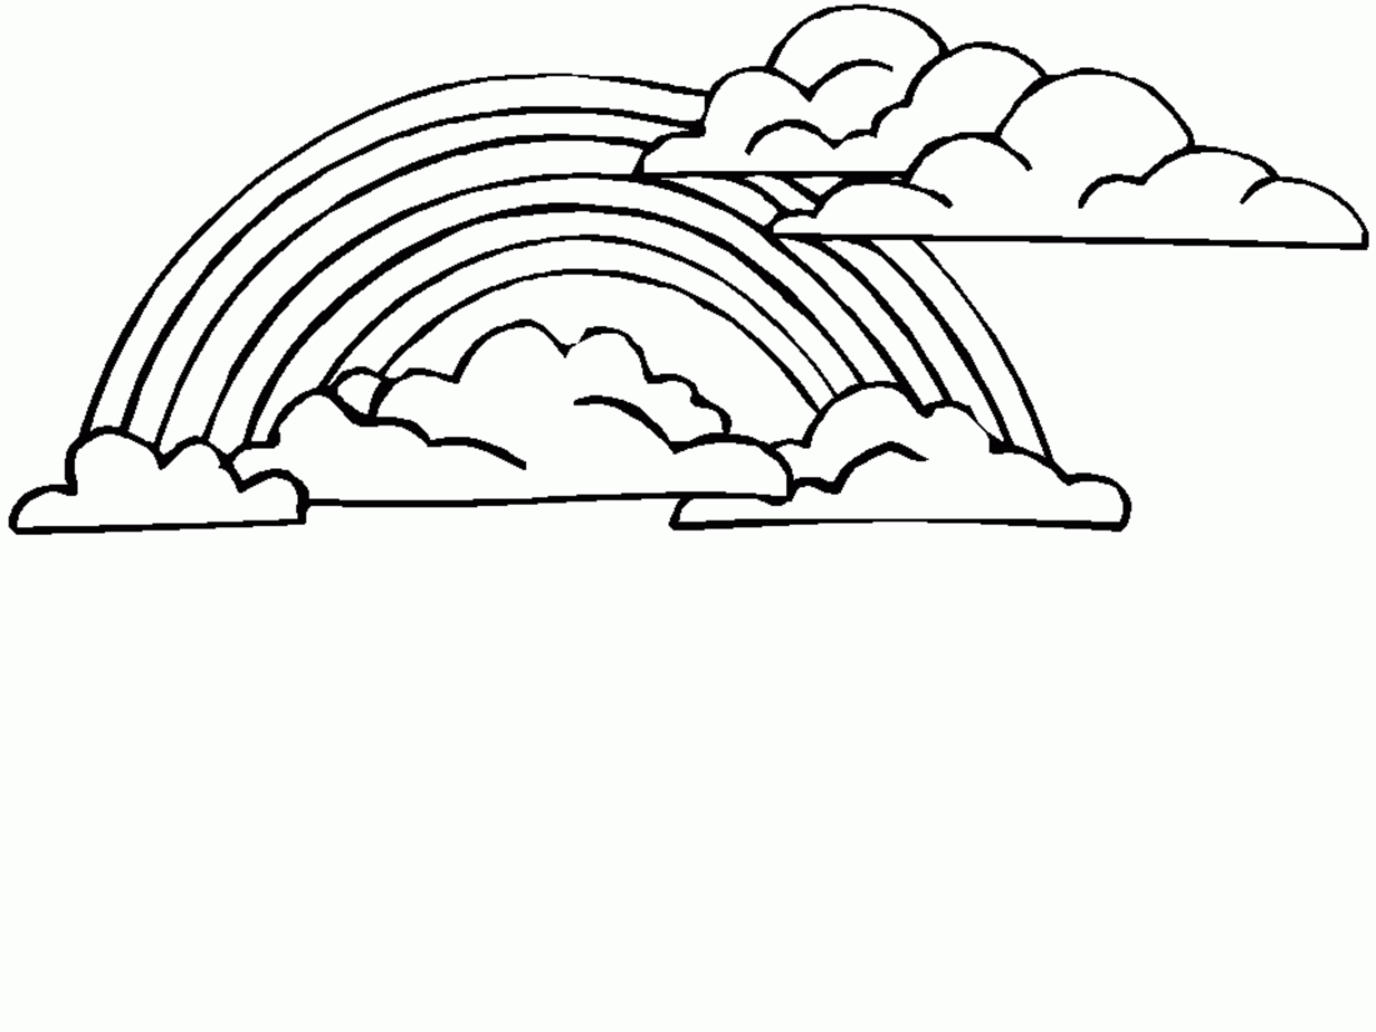 New Coloring Page Rainbow 26 For Free Coloring Kids With Coloring ...